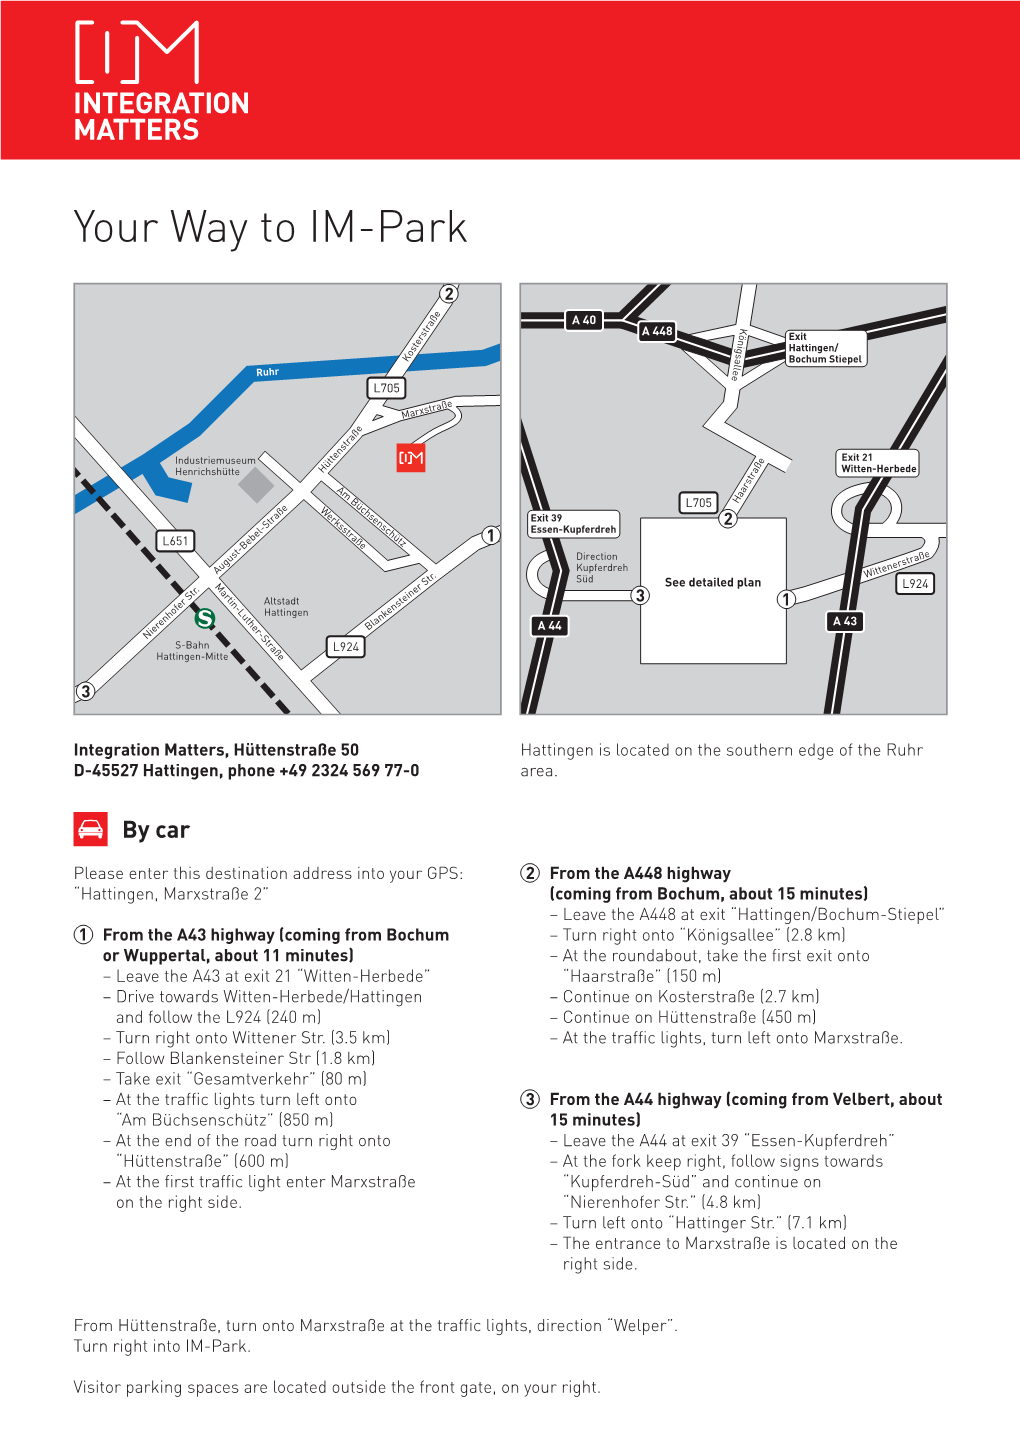 Your Way to IM-Park